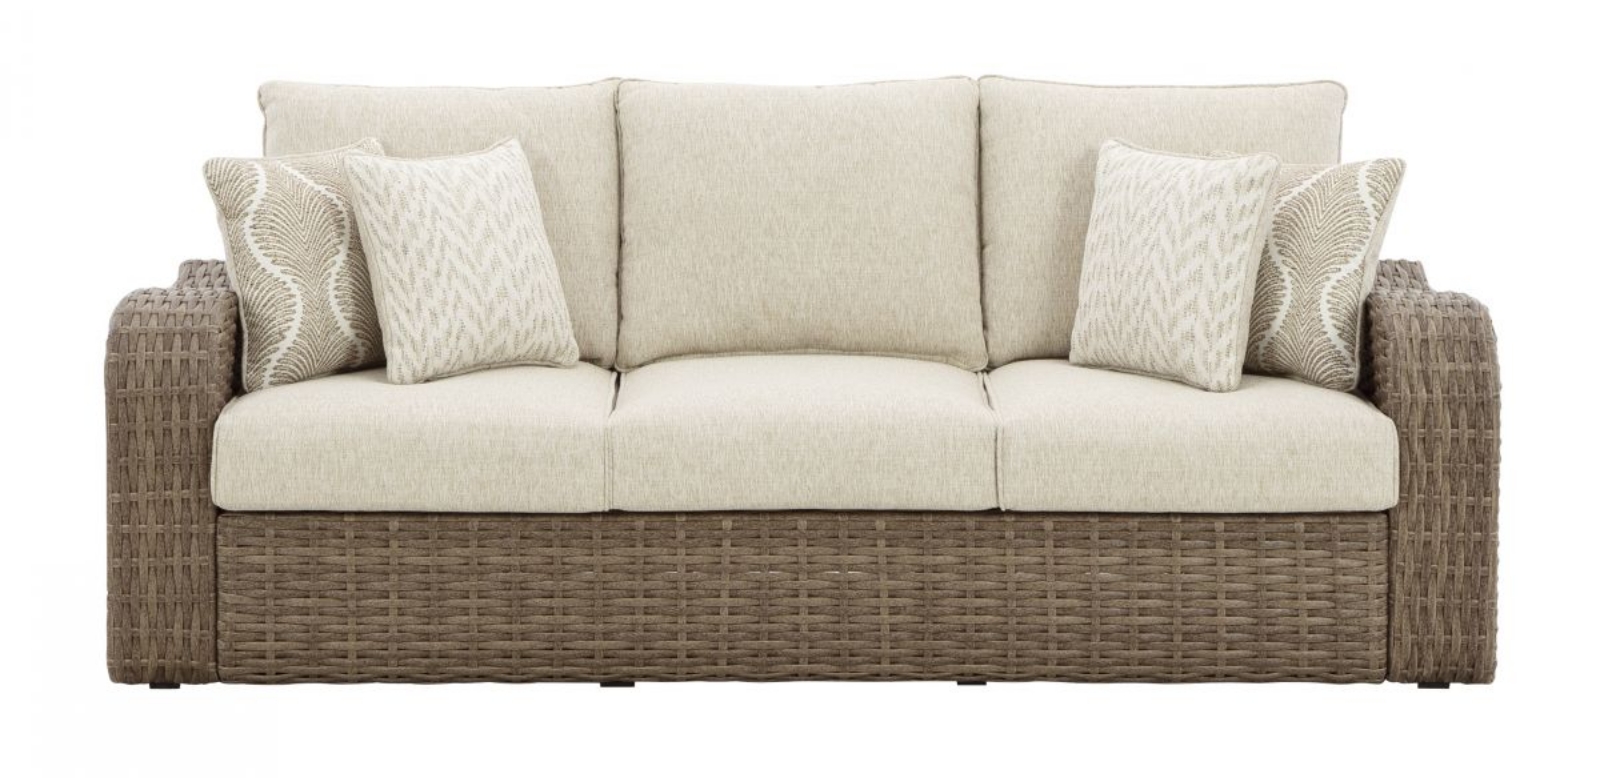 Picture of Sandy Bloom Outdoor Sofa